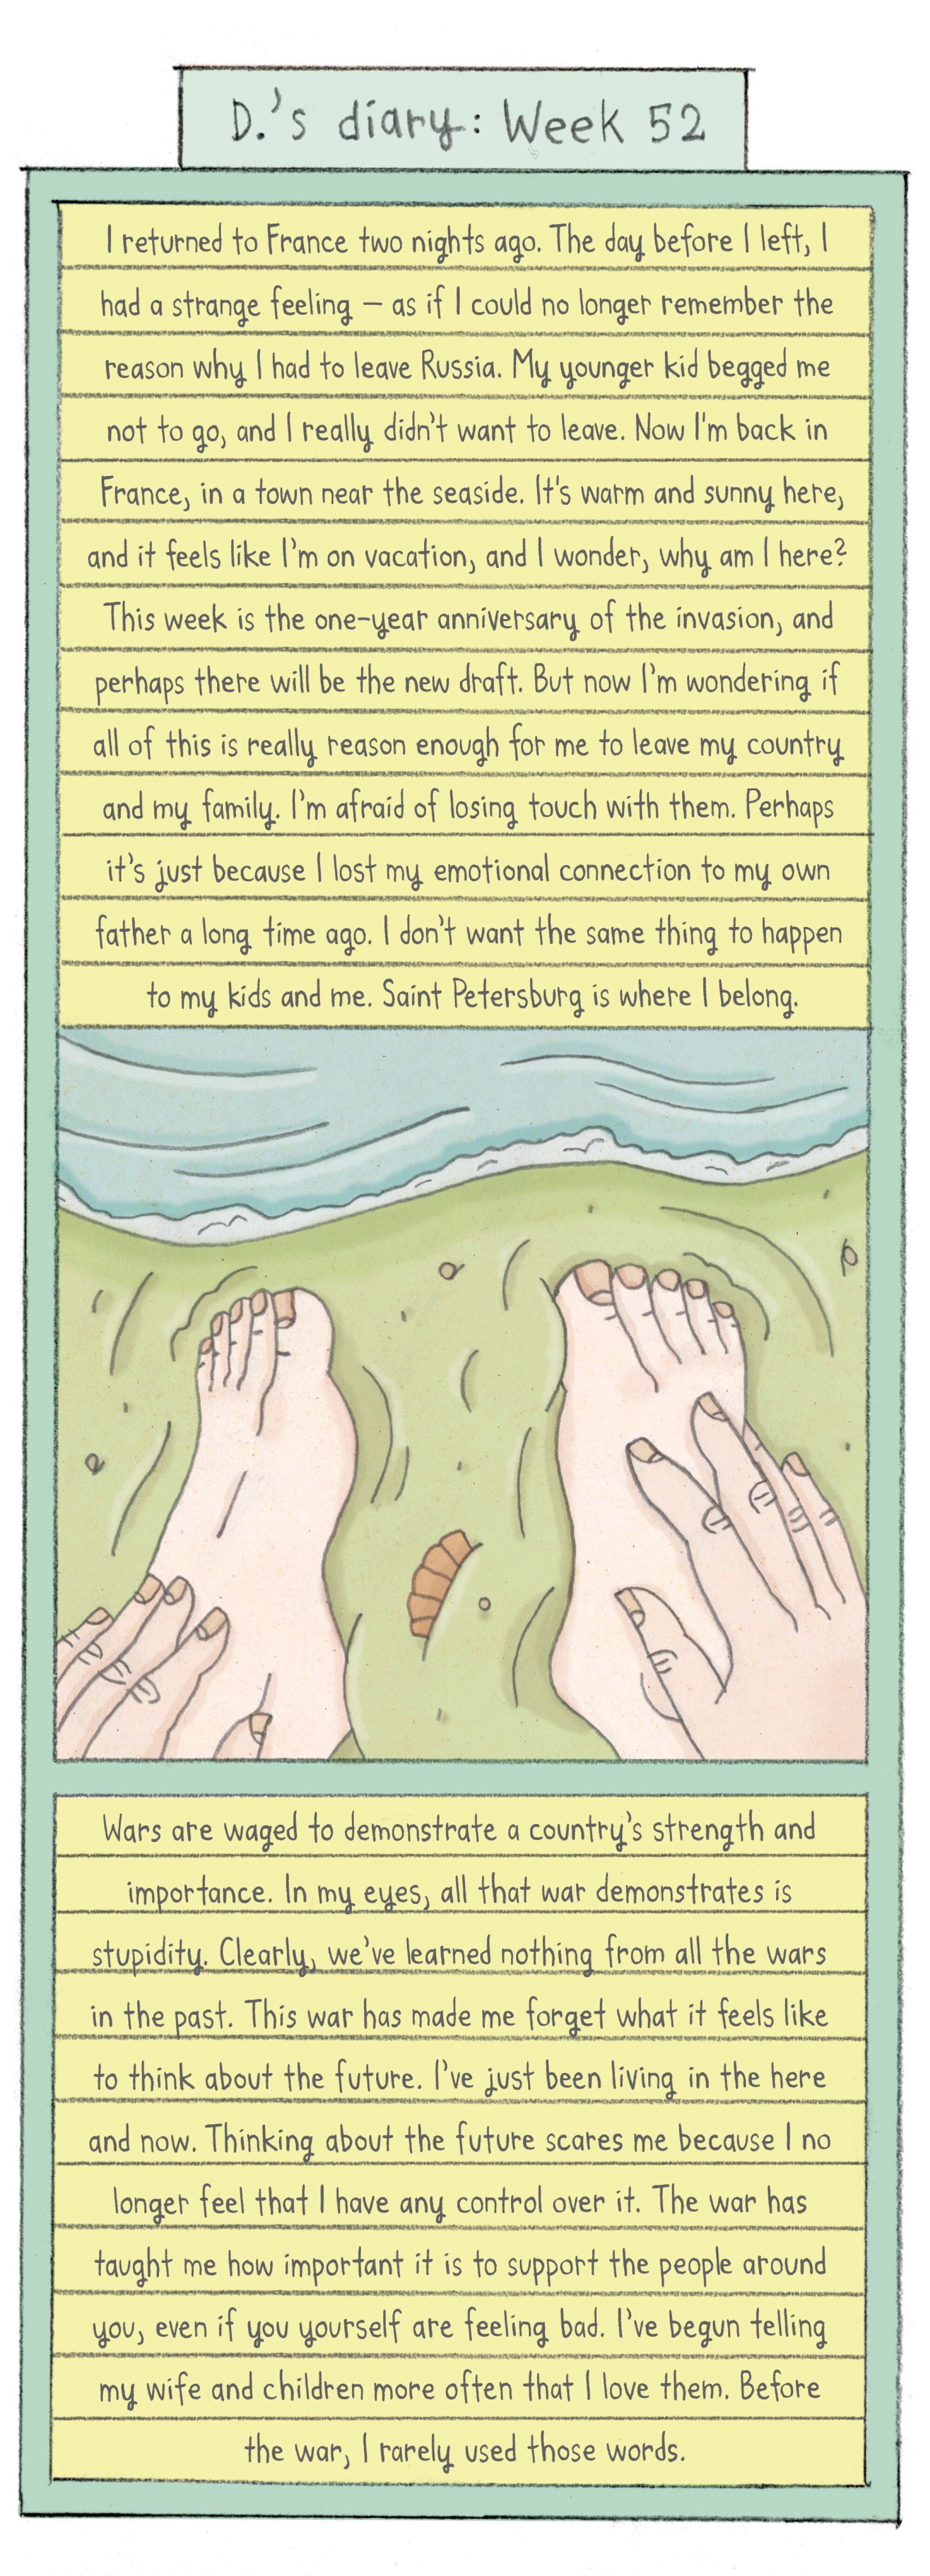 comic showing a pair of feet in the sand of a beach in a close up view with the water lapping. Hands resting on feet.